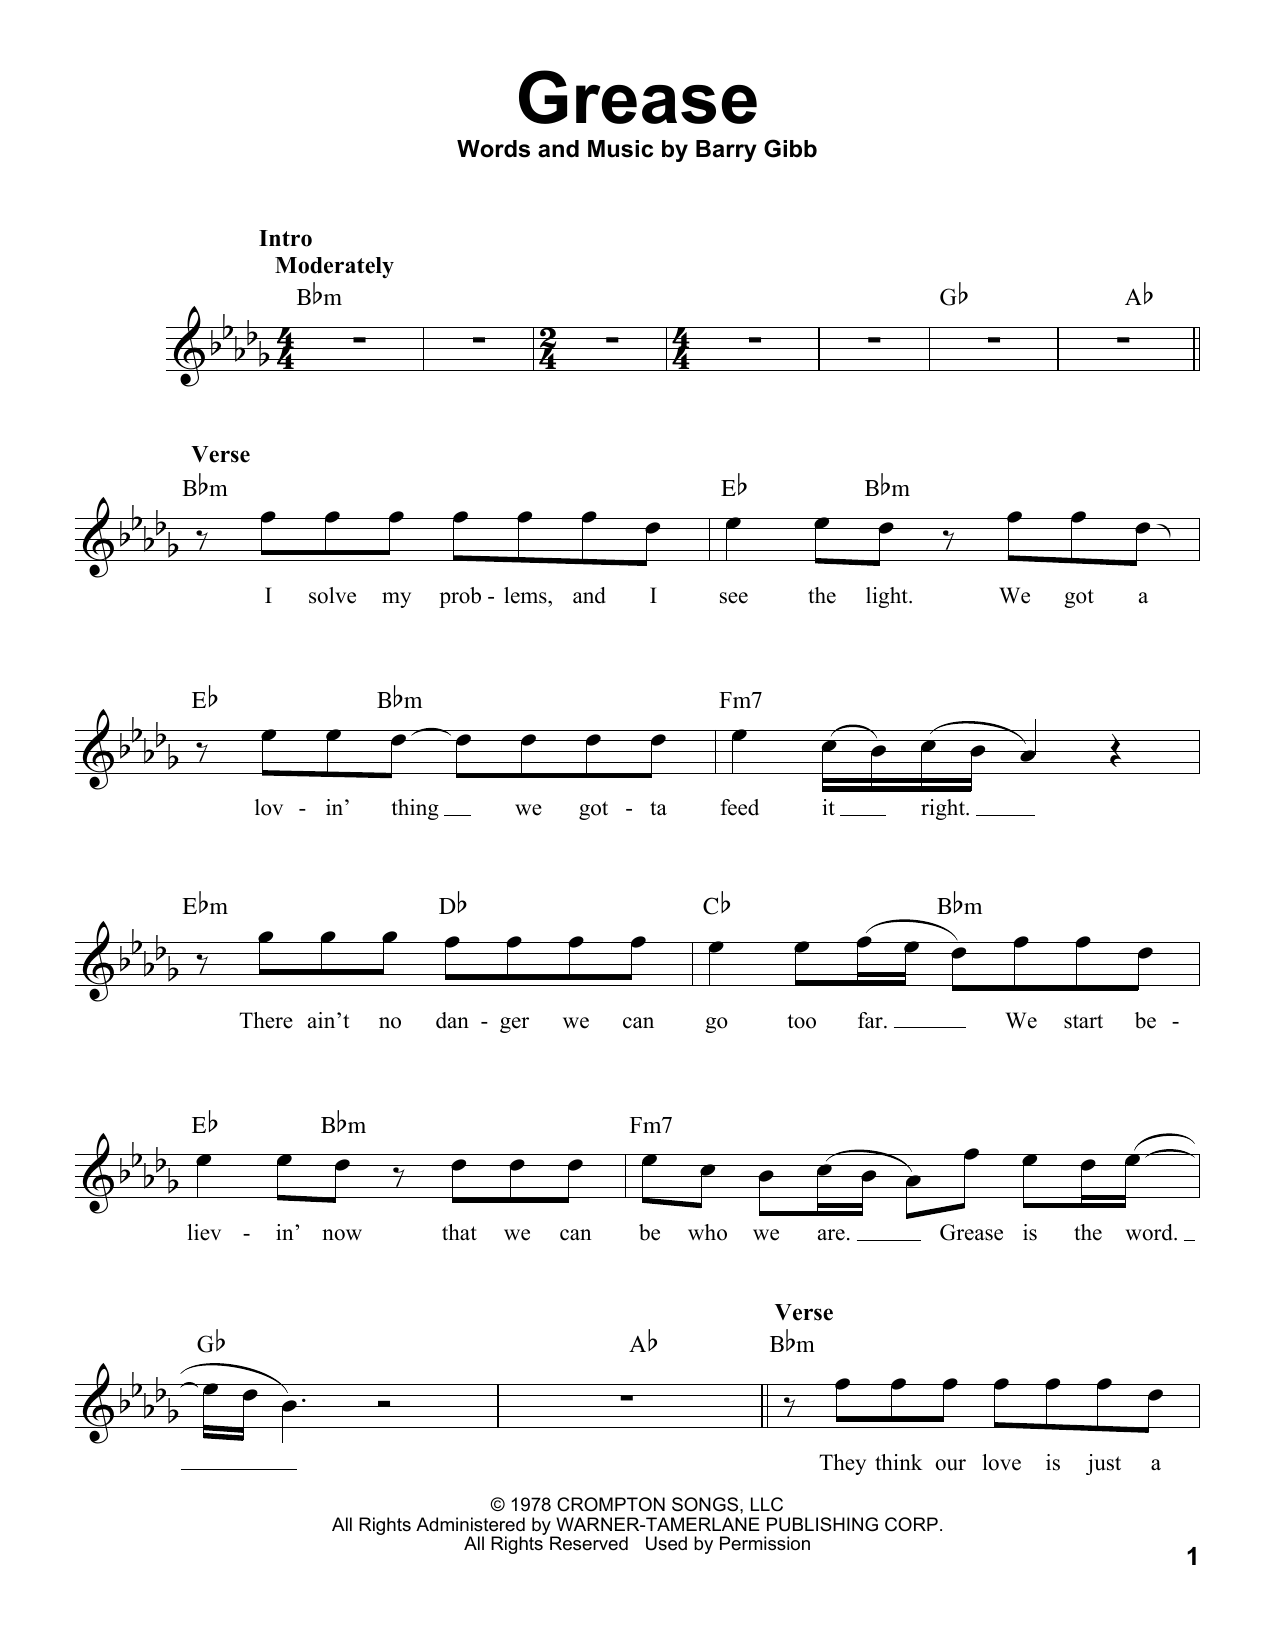 Download Barry Gibb Grease Sheet Music